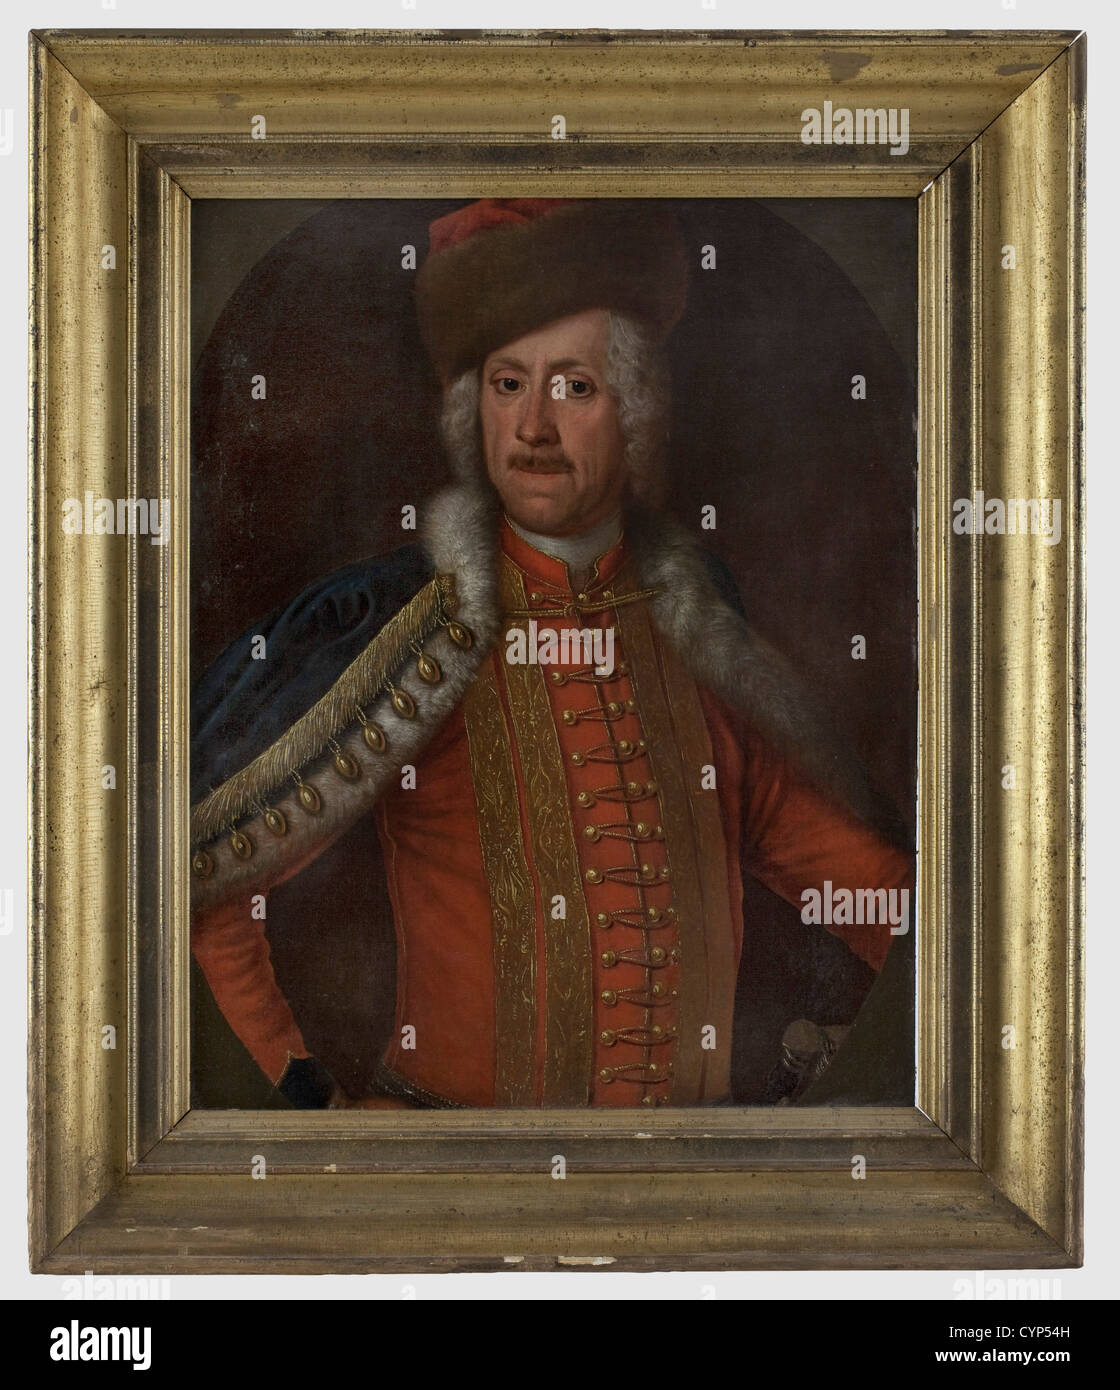 A half portrait of an officer, of the Hussar Regiment No. 2, before 1743. Oil on canvas, picture size 58 x 74 cm, previously probably in an oval frame, unsigned, undated. On the back later labelled 'Hans Joachim von Zieten Königl. preuß. Major' and 'I. Krügel accad pinx 1737'. In an old, simple gilt frame. The picture at hand is one of the earliest portraits of a member of the Life Hussar Regiment and can be dated between 1735 and 1743. The picture is published in 'Altpreußische Offiziersporträts, Studien aus dem Nachlass Hans Bleckwenn', B.R. Kroener, Artist's Copyright has not to be cleared Stock Photo